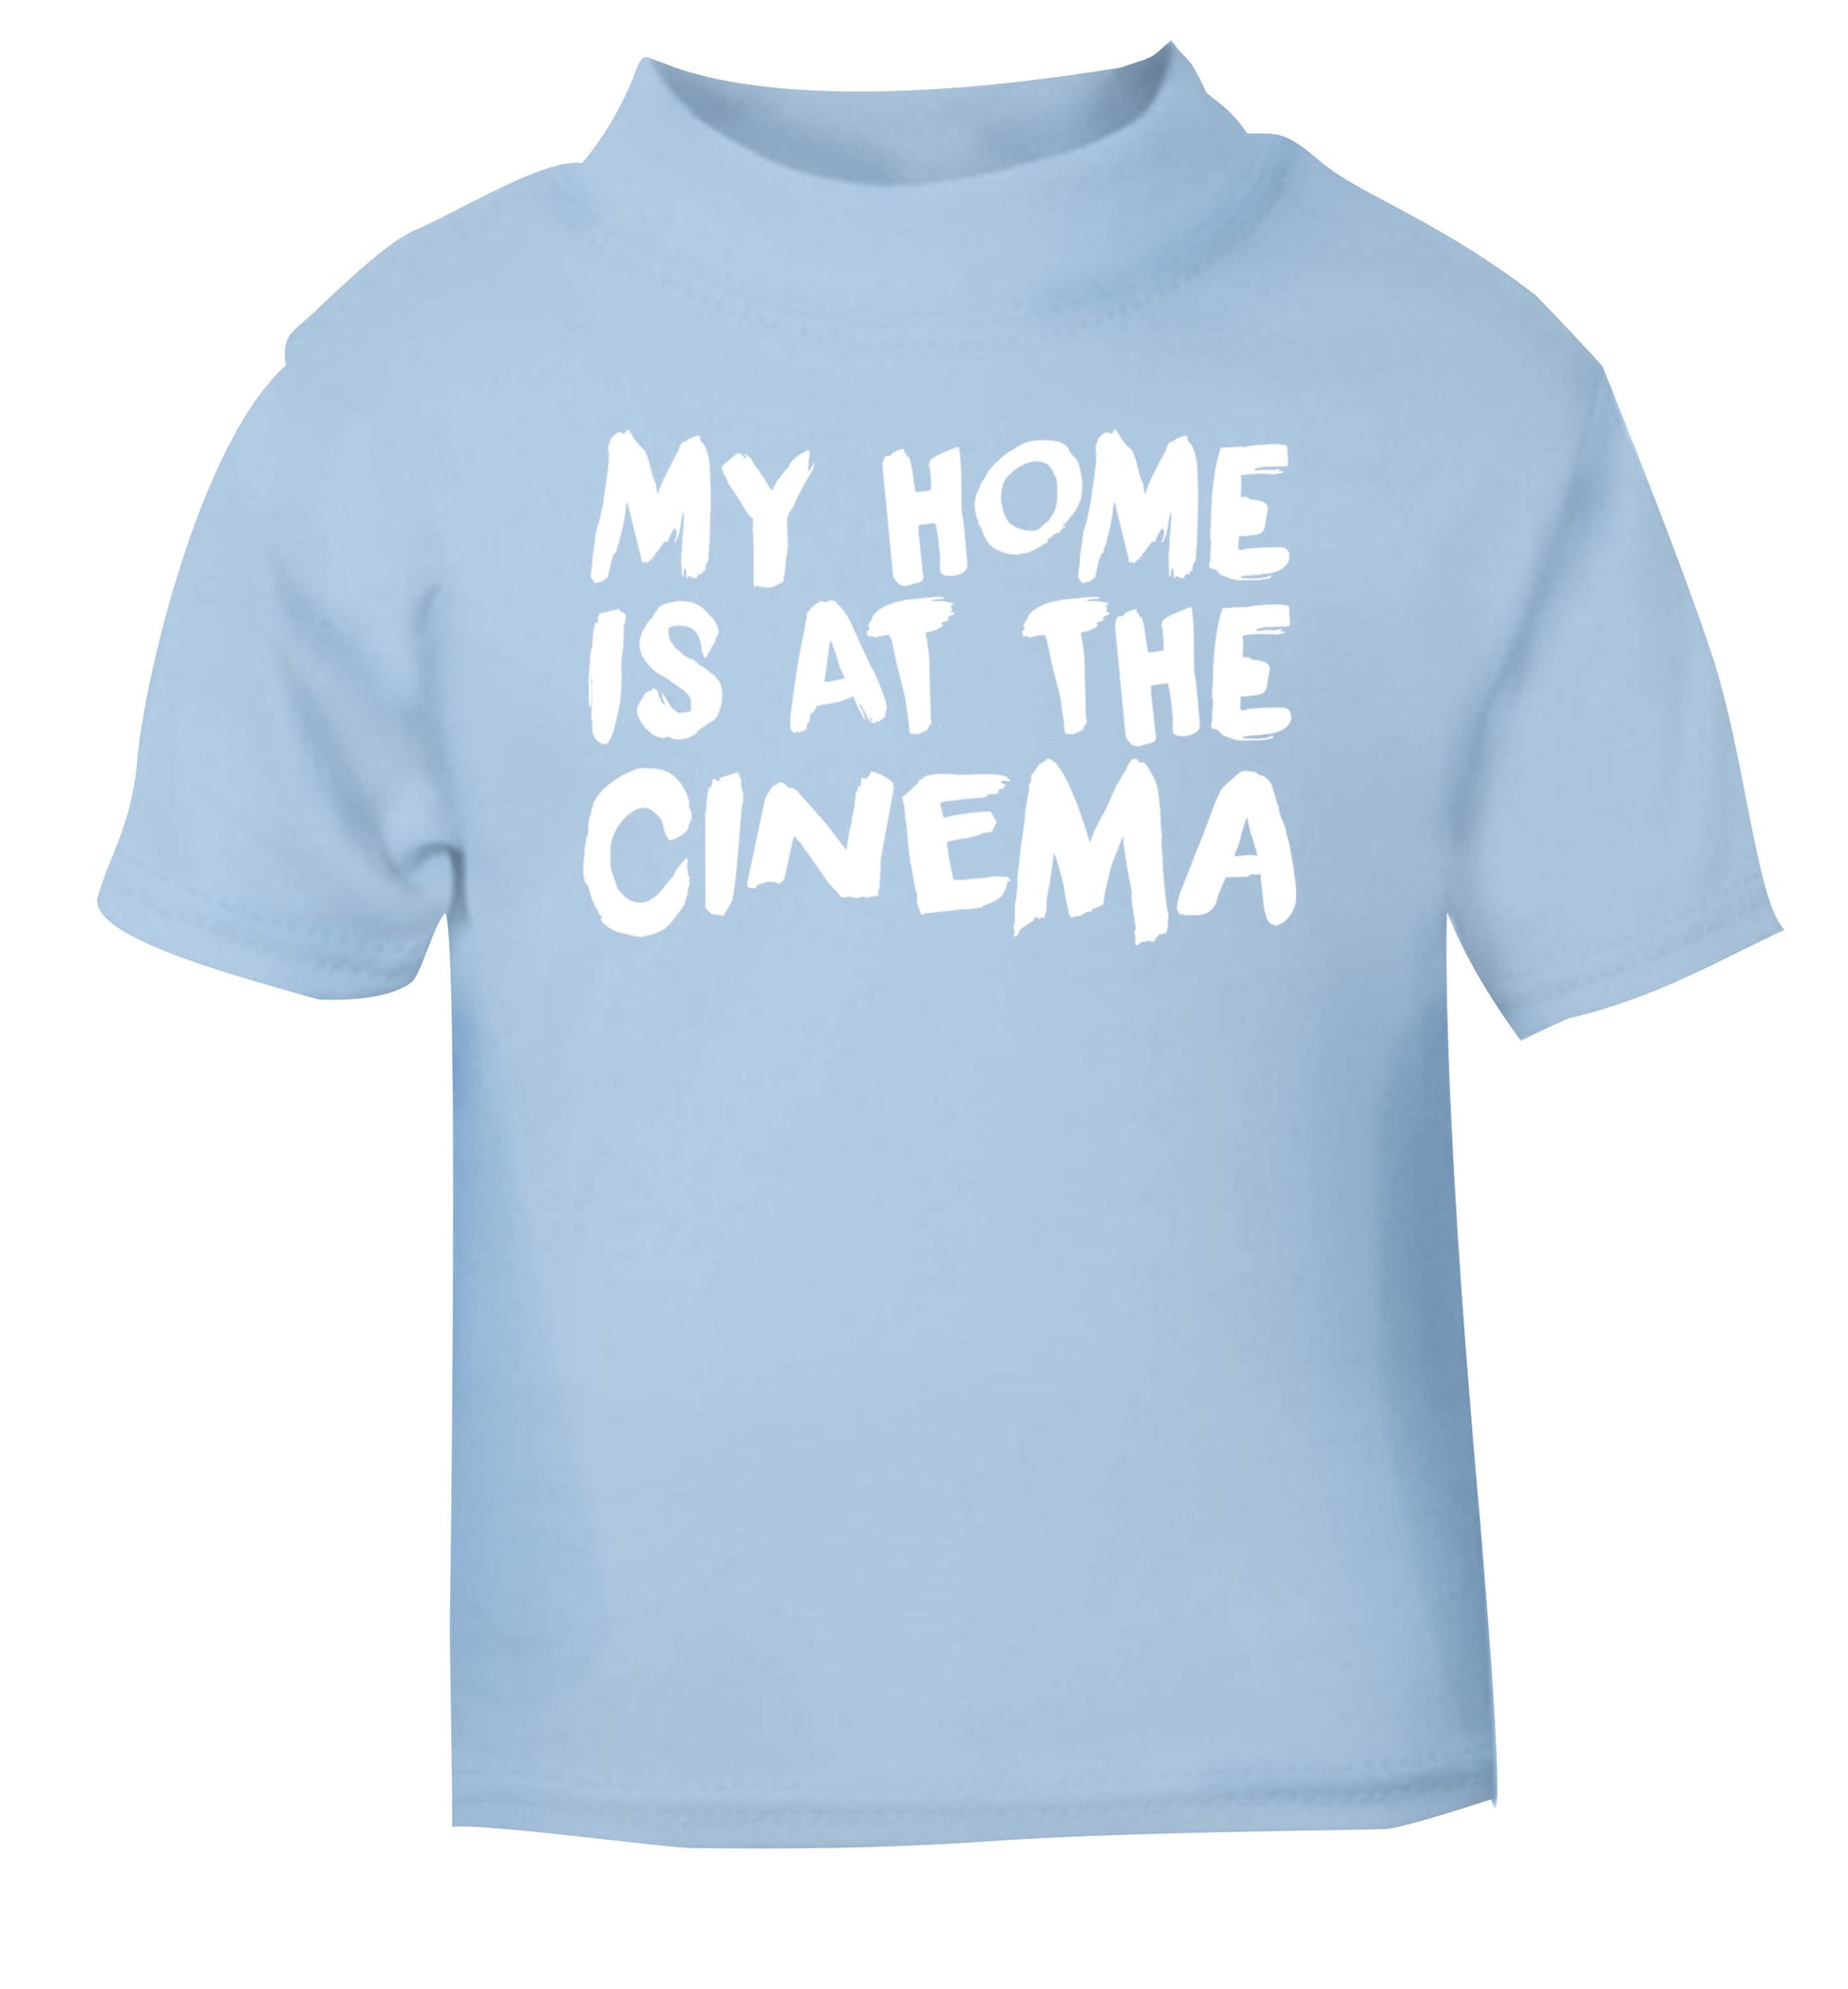 My home is at the cinema light blue Baby Toddler Tshirt 2 Years